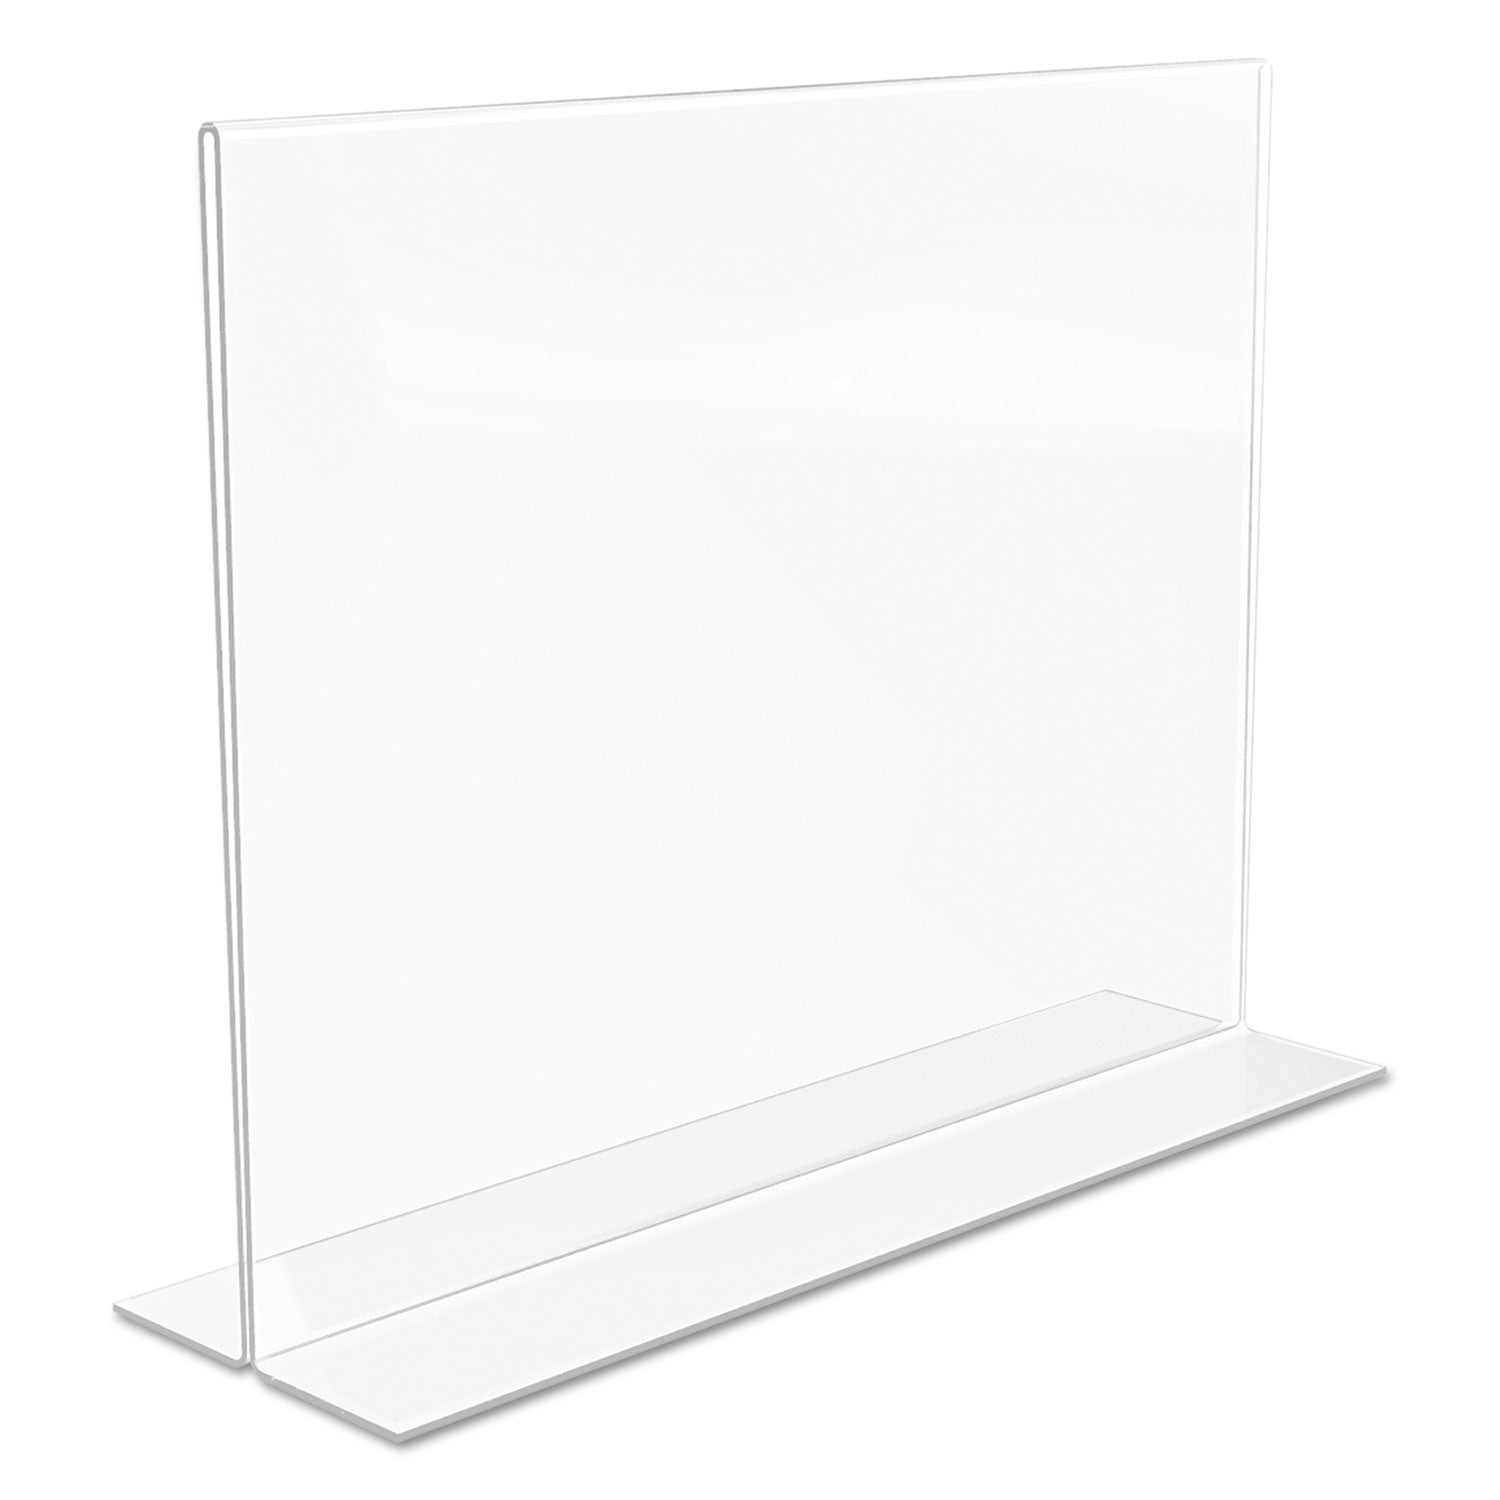 Classic Image Double-Sided Sign Holder, 11 x 8.5 Insert, Clear - 